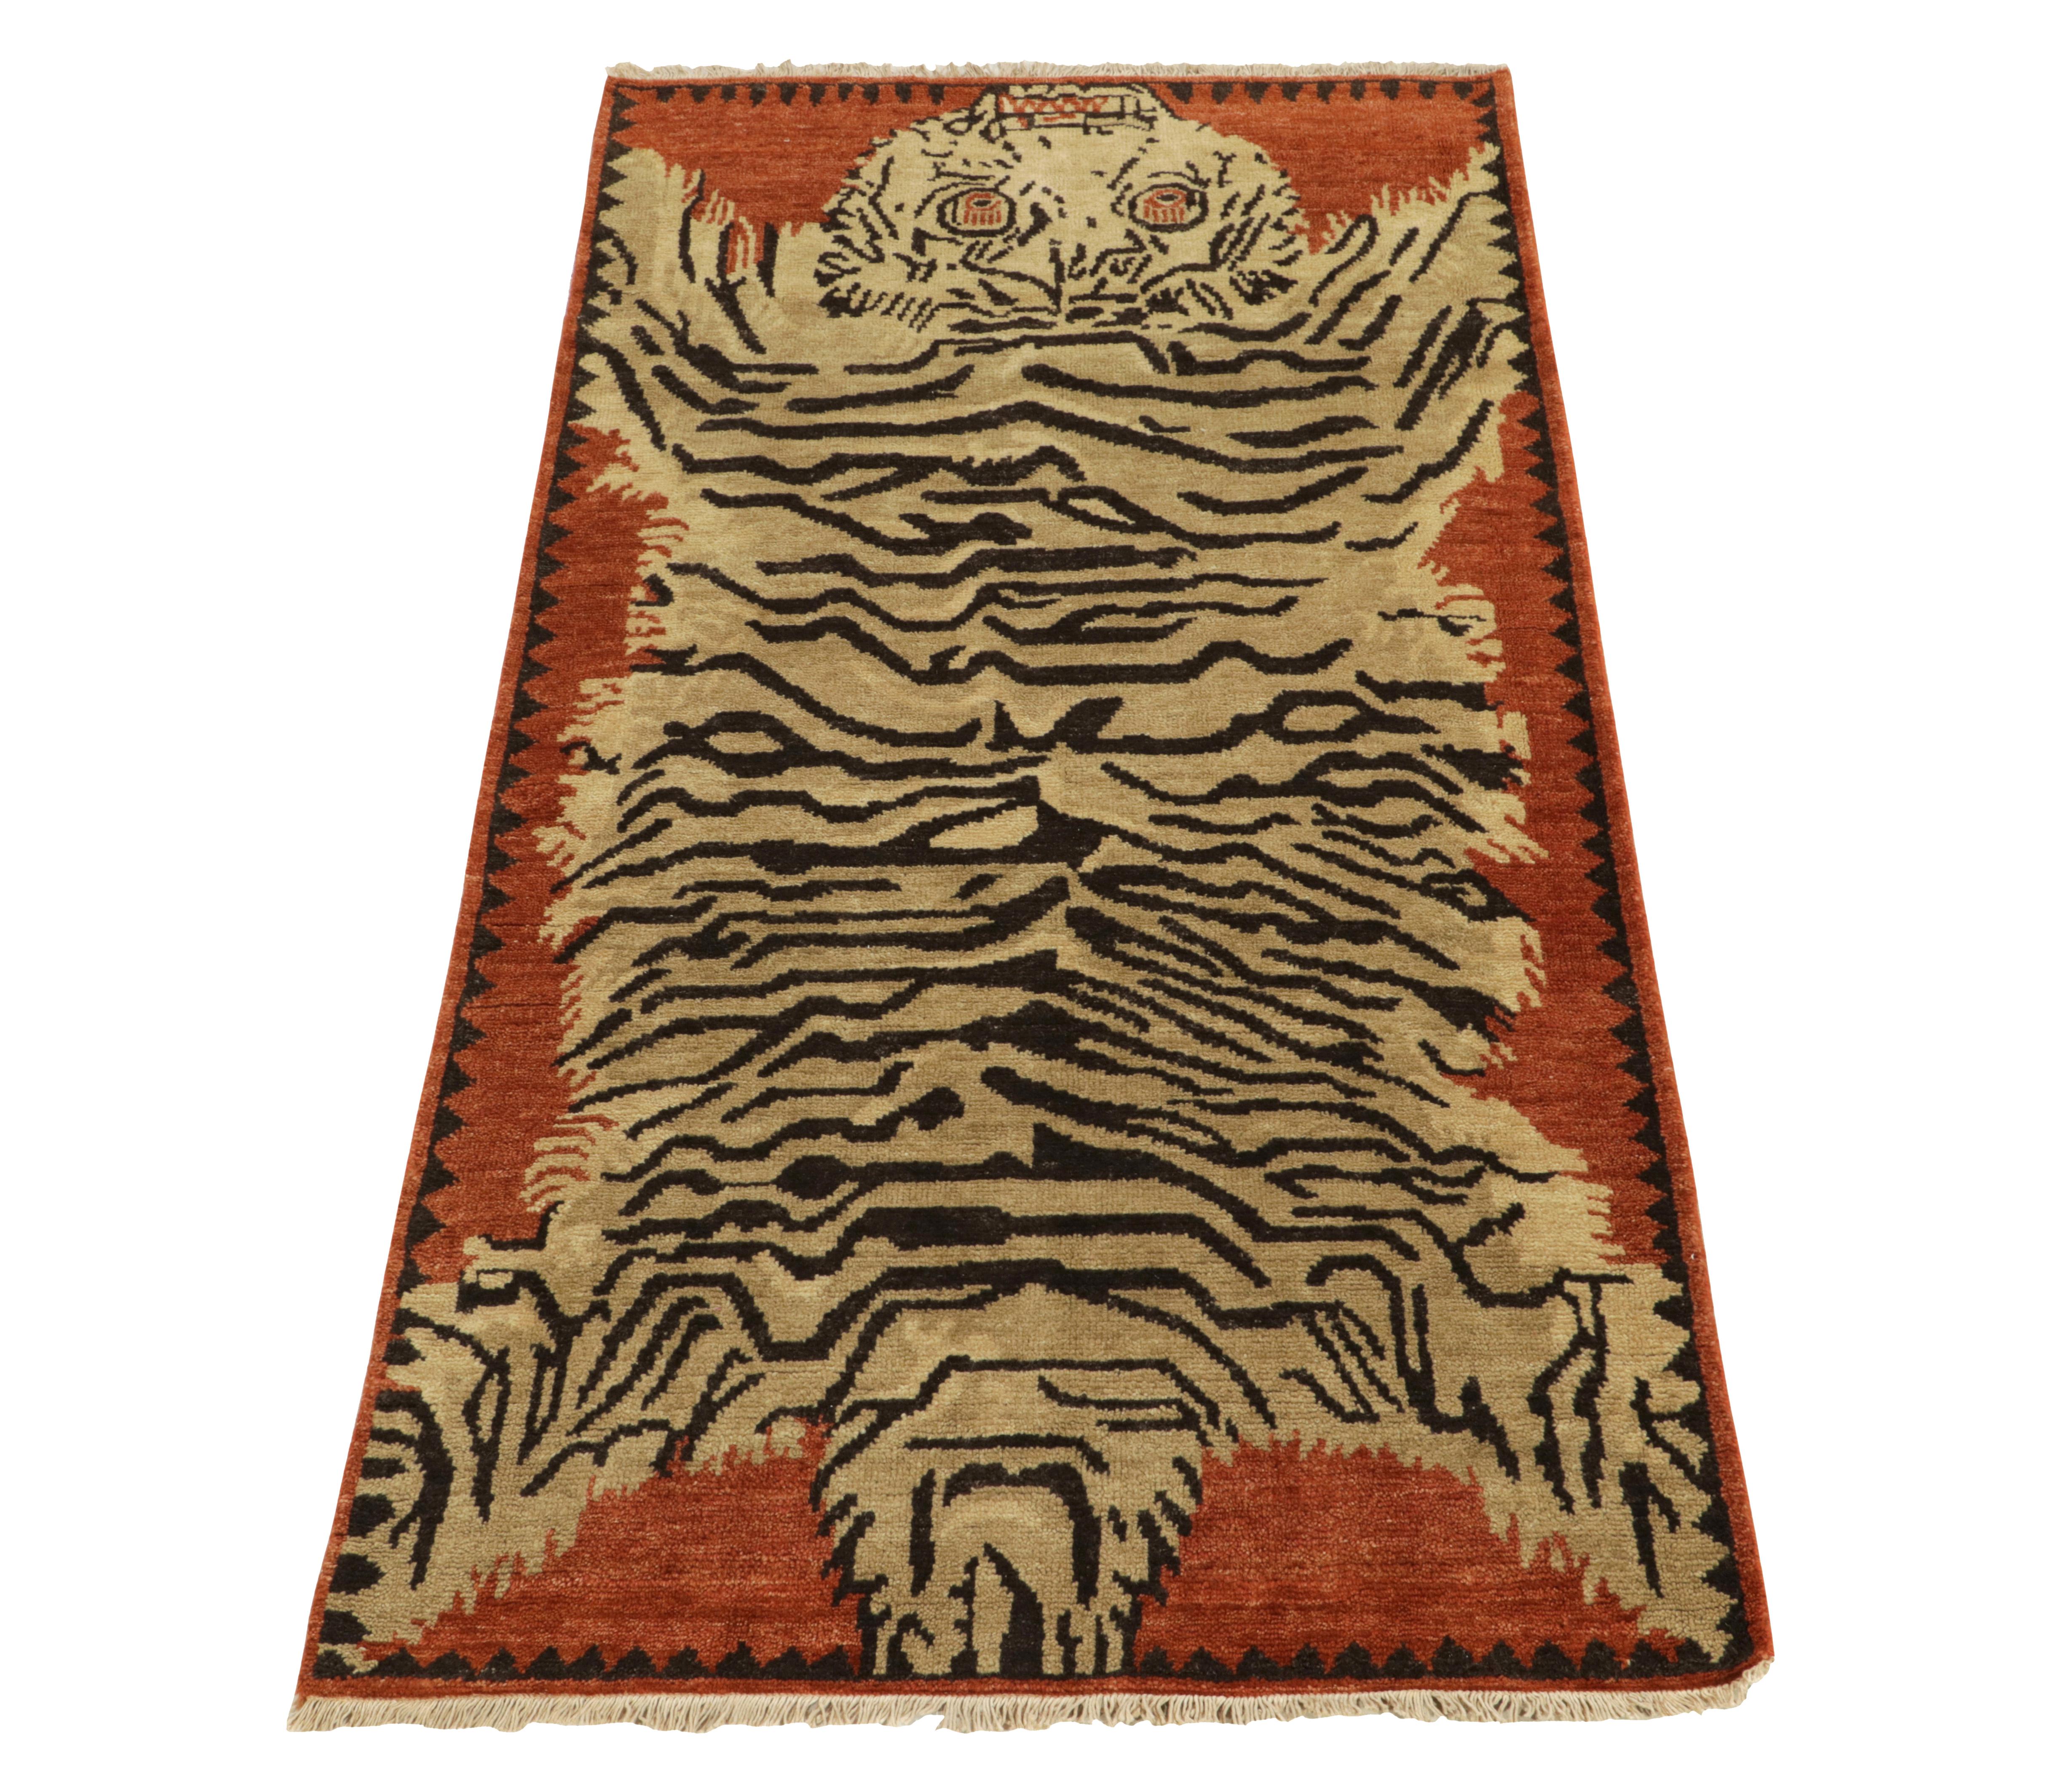 Hand-knotted in healthy wool pile, a 3x7 contemporary runner inspired by classic antique Indian tiger styles—from our Burano selections. The tiger rug pictorial in tones of beige-gold & black rests comfortably on a burnt orange background,